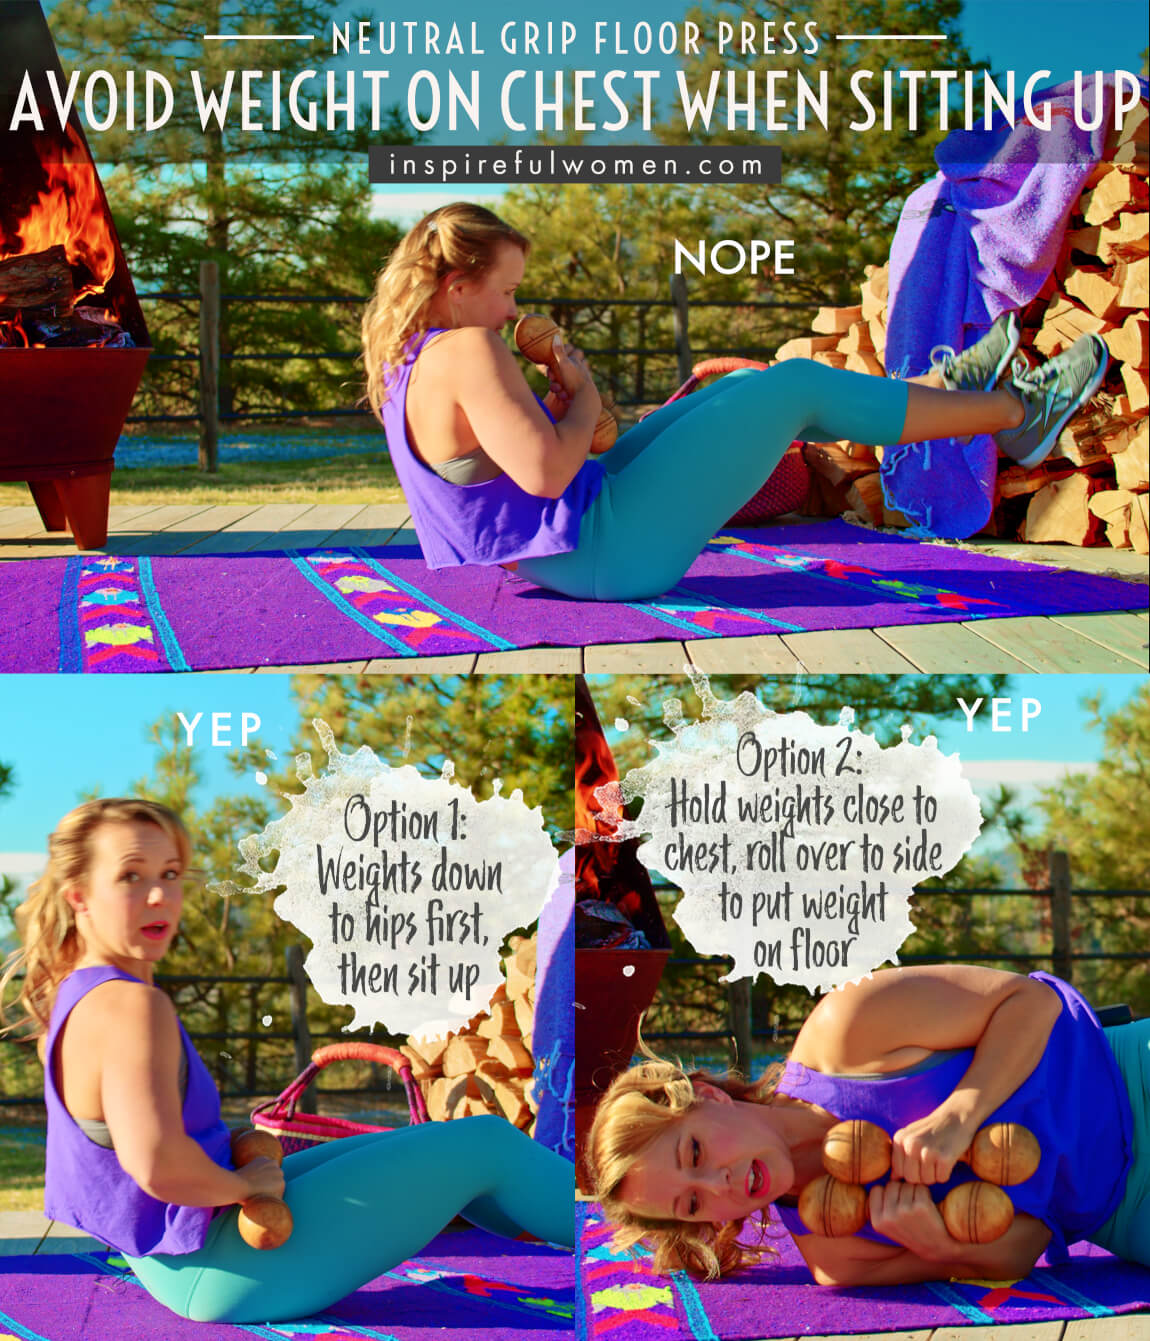 avoid-weight-on-chest-when-sitting-up-db-floor-press-chest-exercise-proper-form